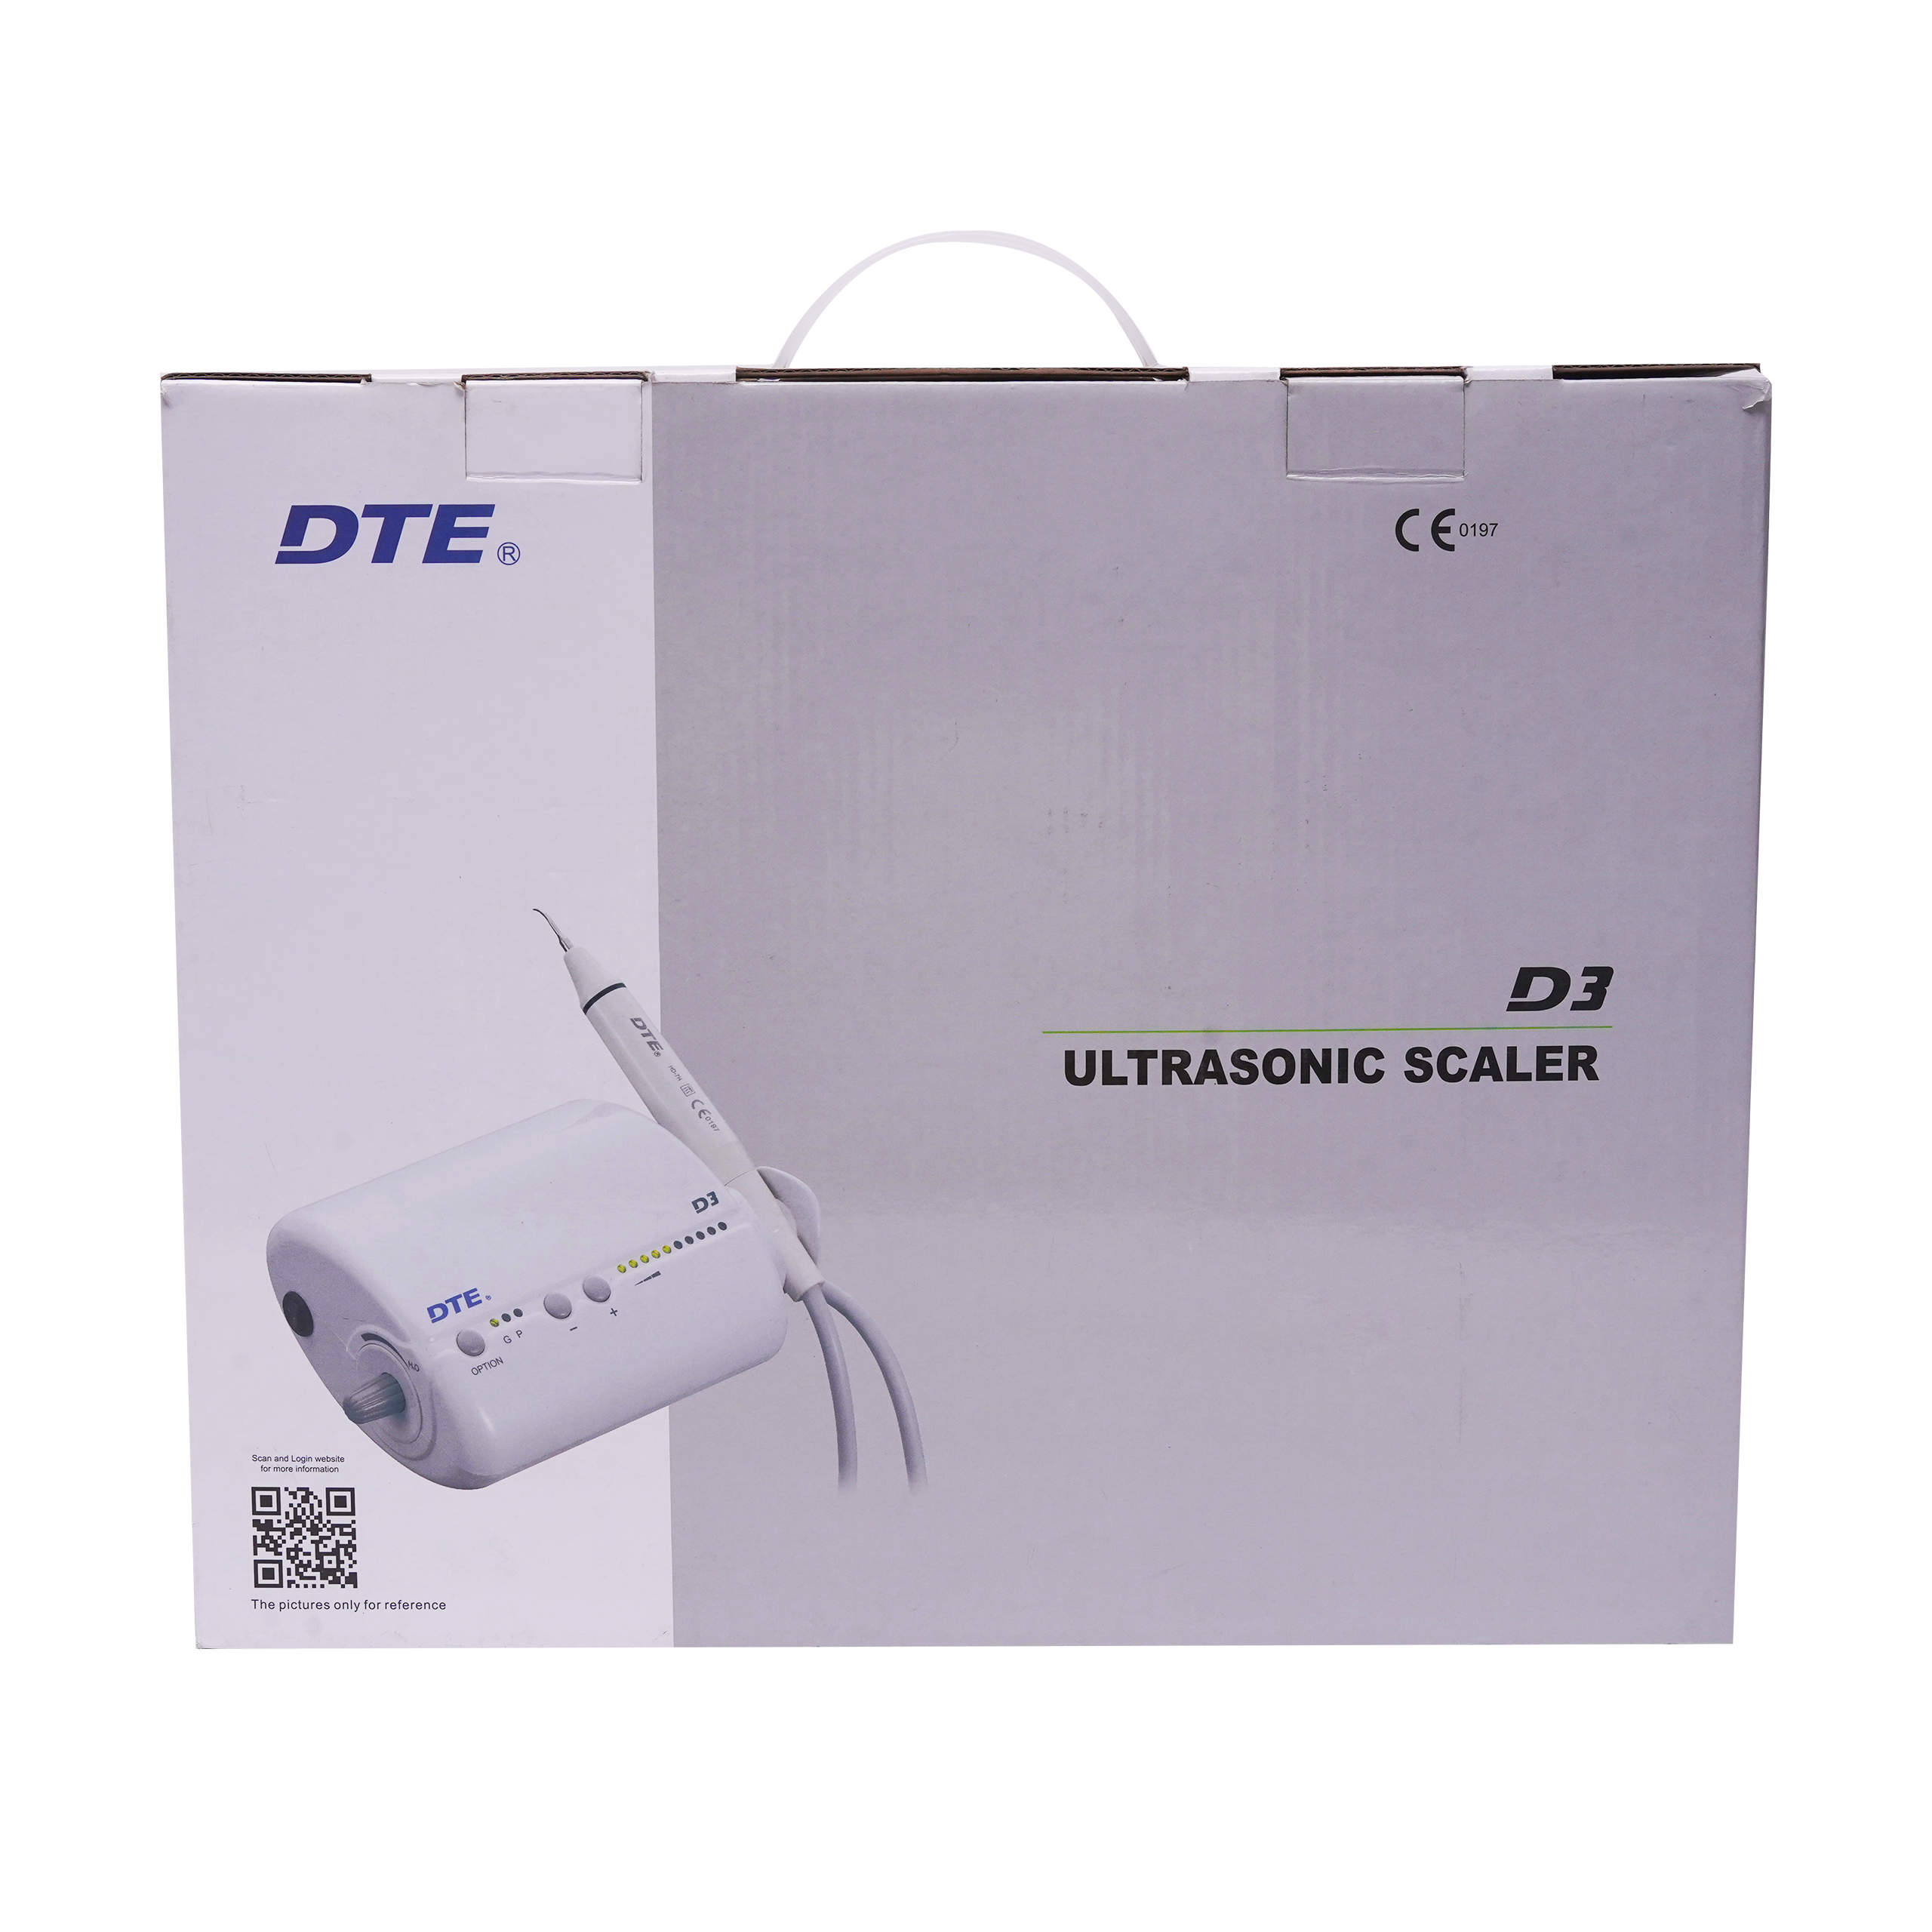 Buy Woodpecker Ultrasonic Scaler DTE D3 Online at Best Prices 